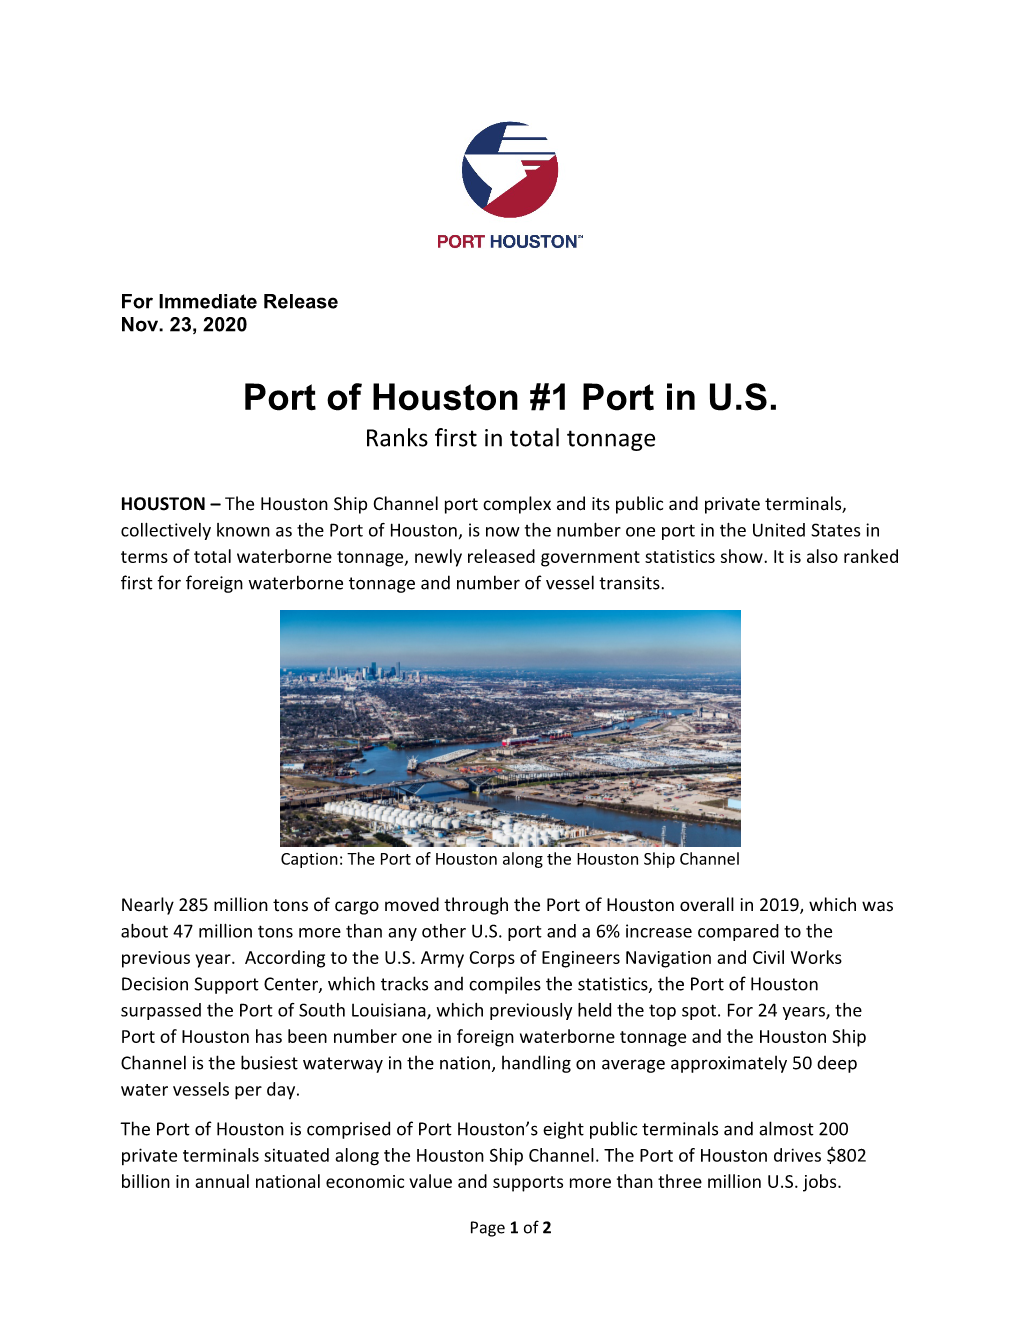 Port of Houston #1 Port in U.S. Ranks First in Total Tonnage